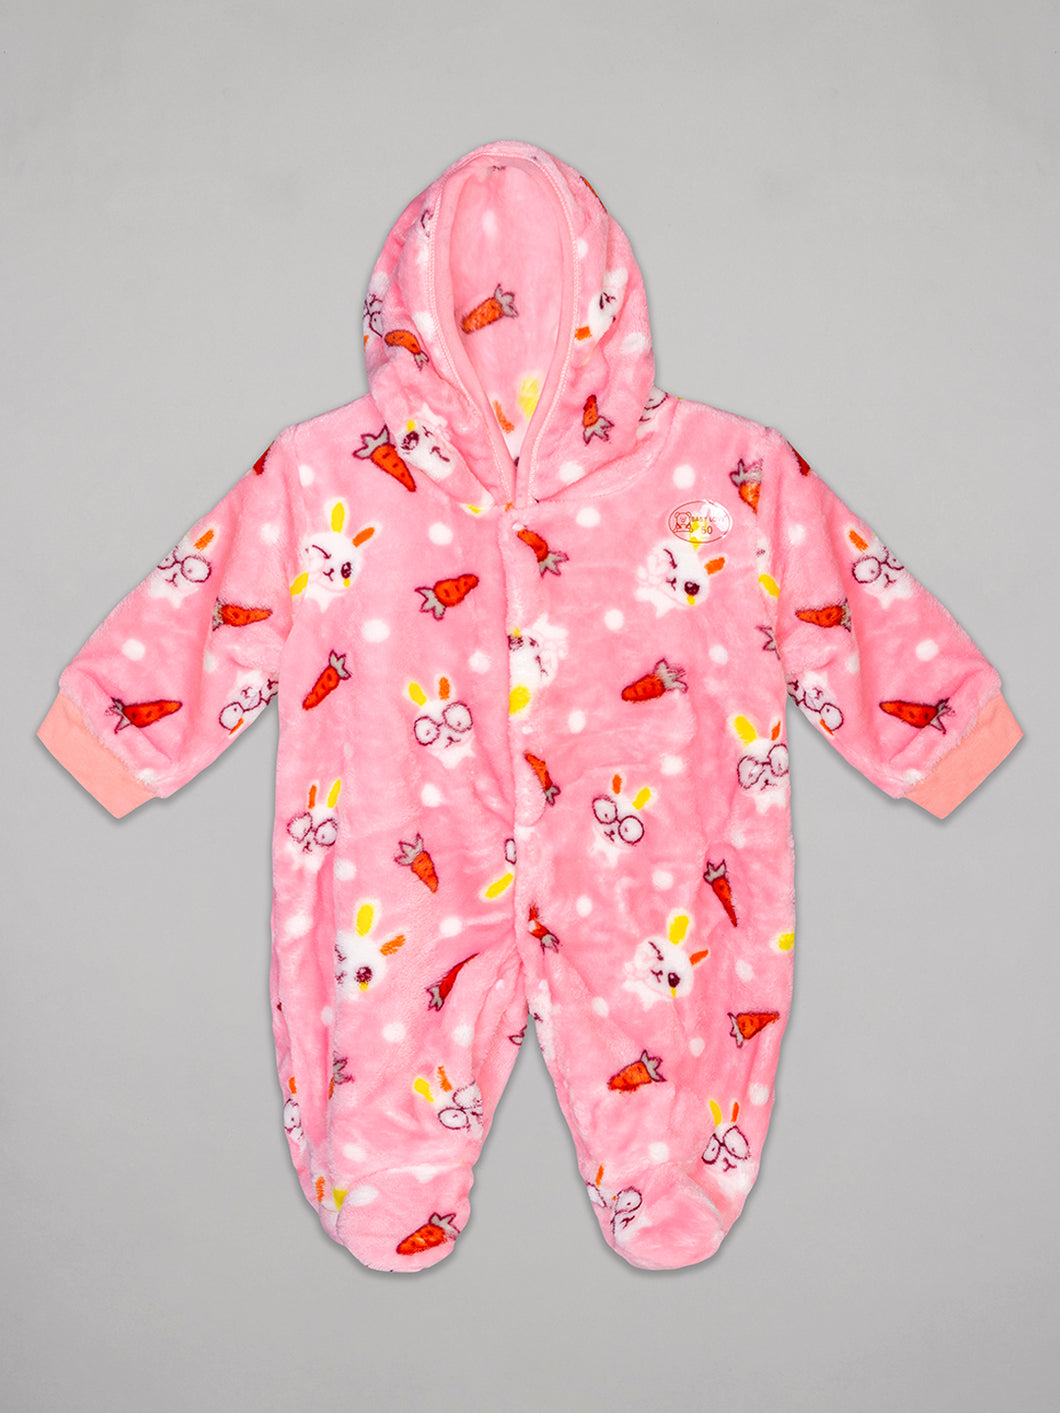 The Sandbox Clothing Co. Winter Rompers 8025